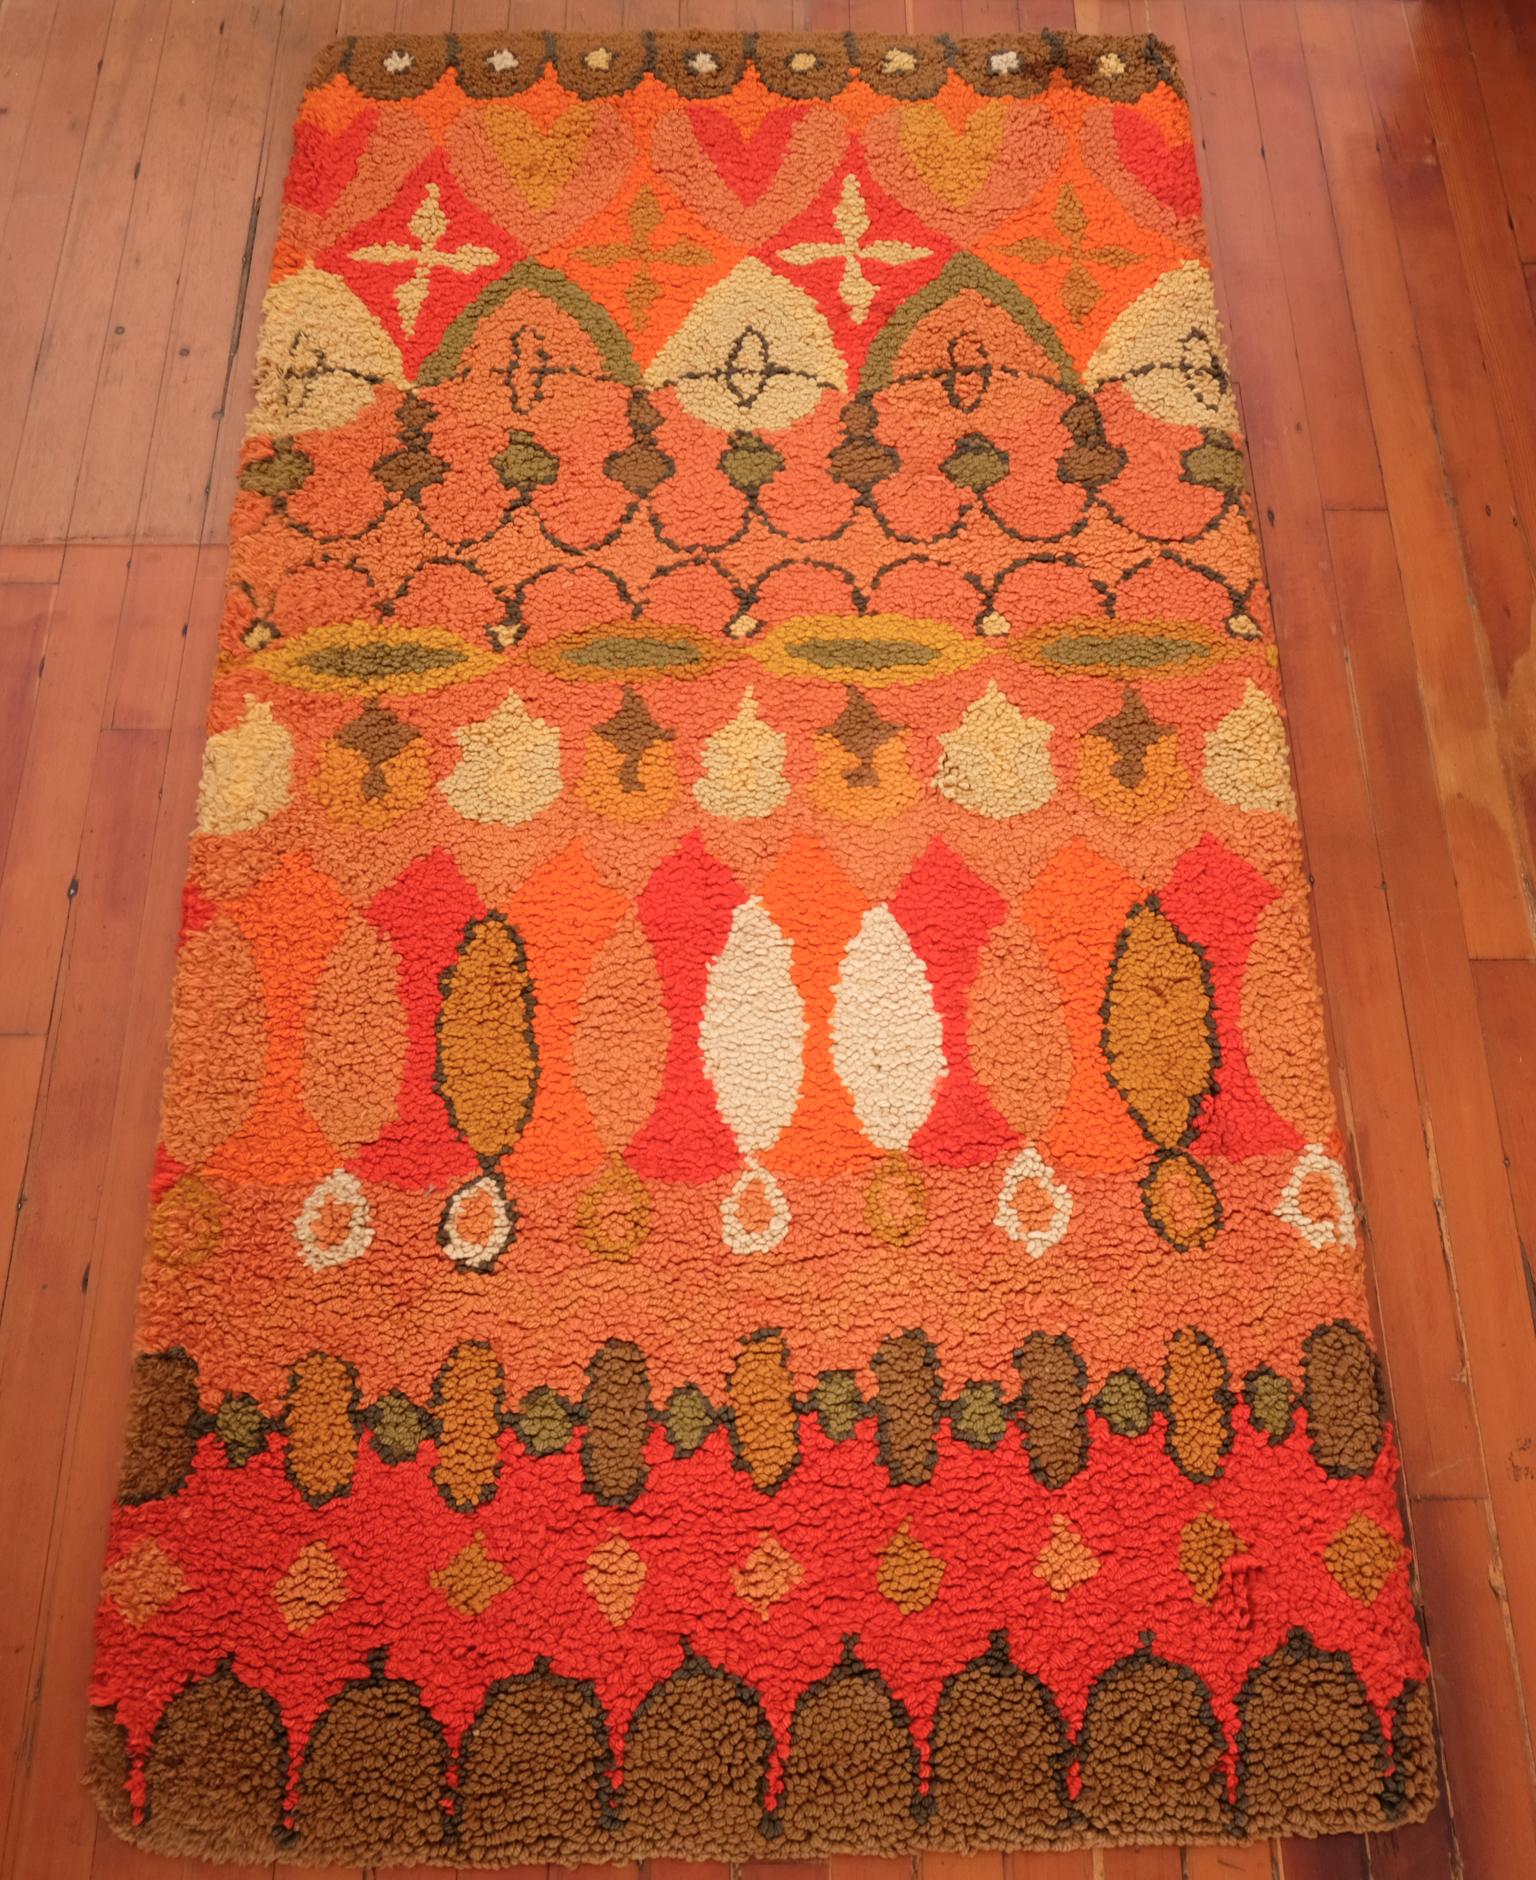 A hand-hooked rug by Cynthia Sargent (1922-2006). Handmade in Mexico City during the 1960s. Wool, with natural dyes. Retains the original label from the Riggs-Sargent studio. 

Cynthia Sargent went to Black Mountain College for music, but ended up